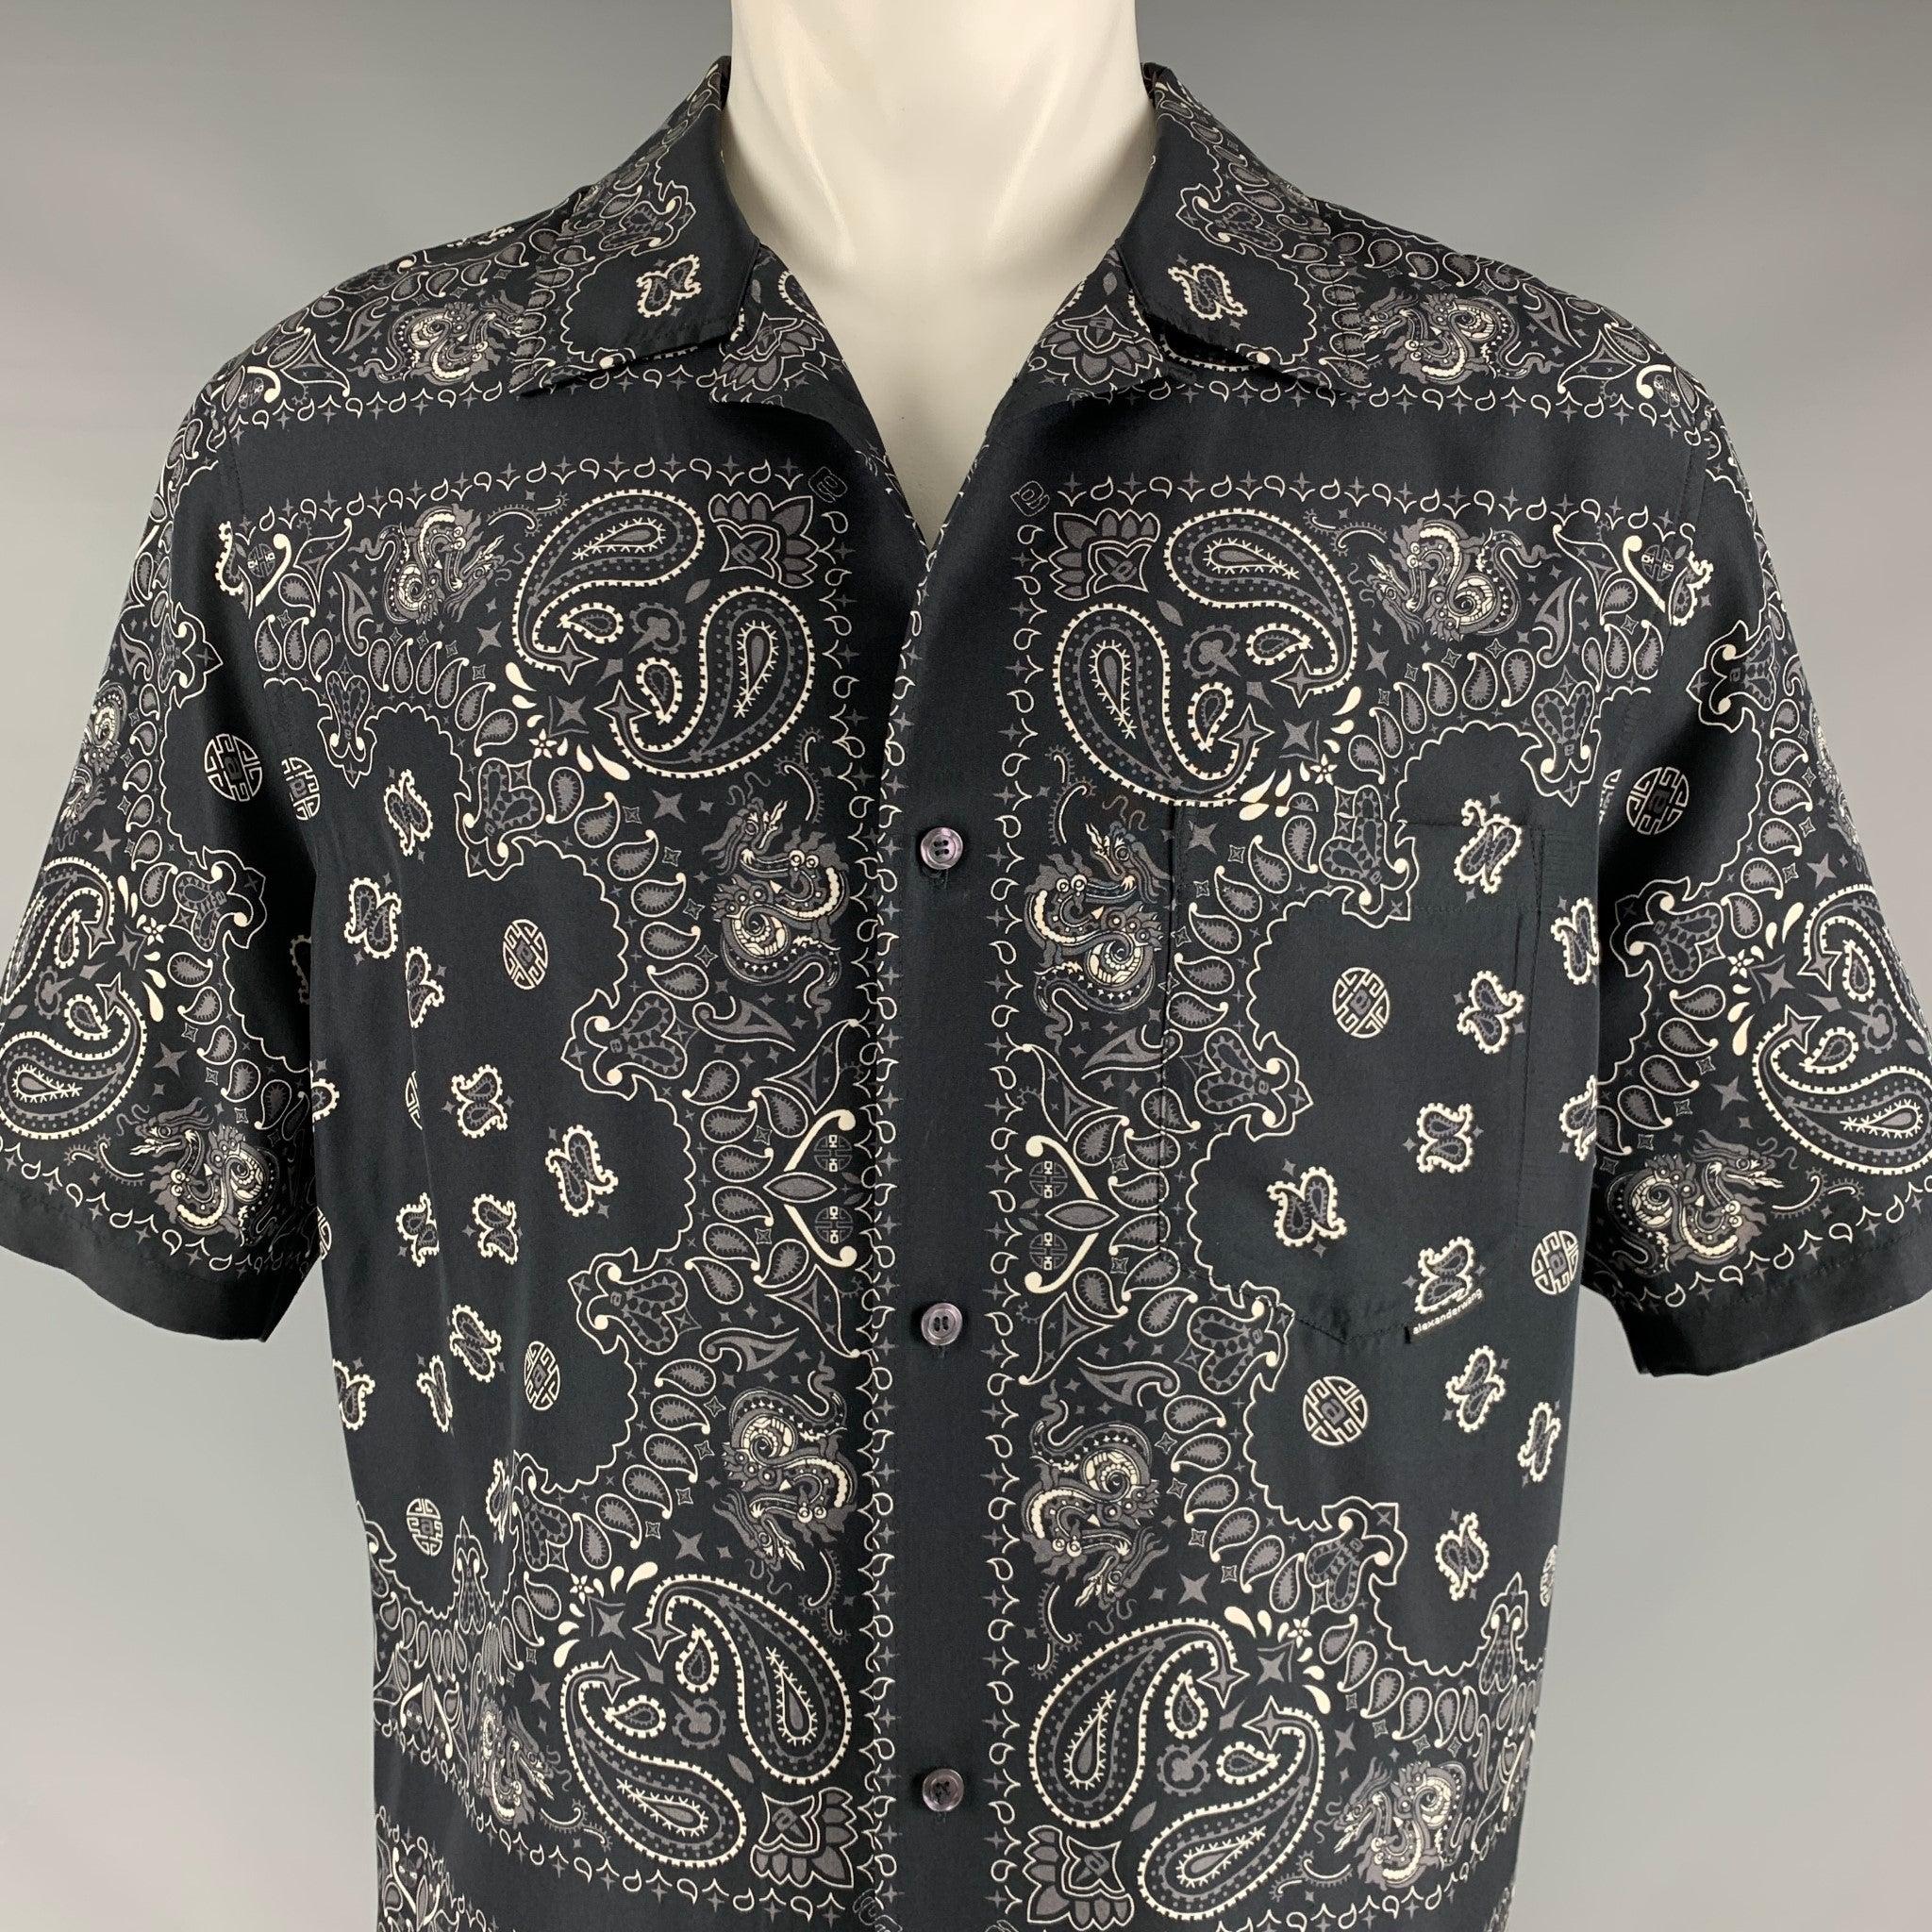 ALEXANDER WANG set
in a black and white silk fabric featuring a bandana style print, one pocket, and a button closure. Comes with matching shorts.Very Good Pre-Owned Condition. Minor signs of wear. 

Marked:   M 

Measurements: 
  - ShirtShoulder: